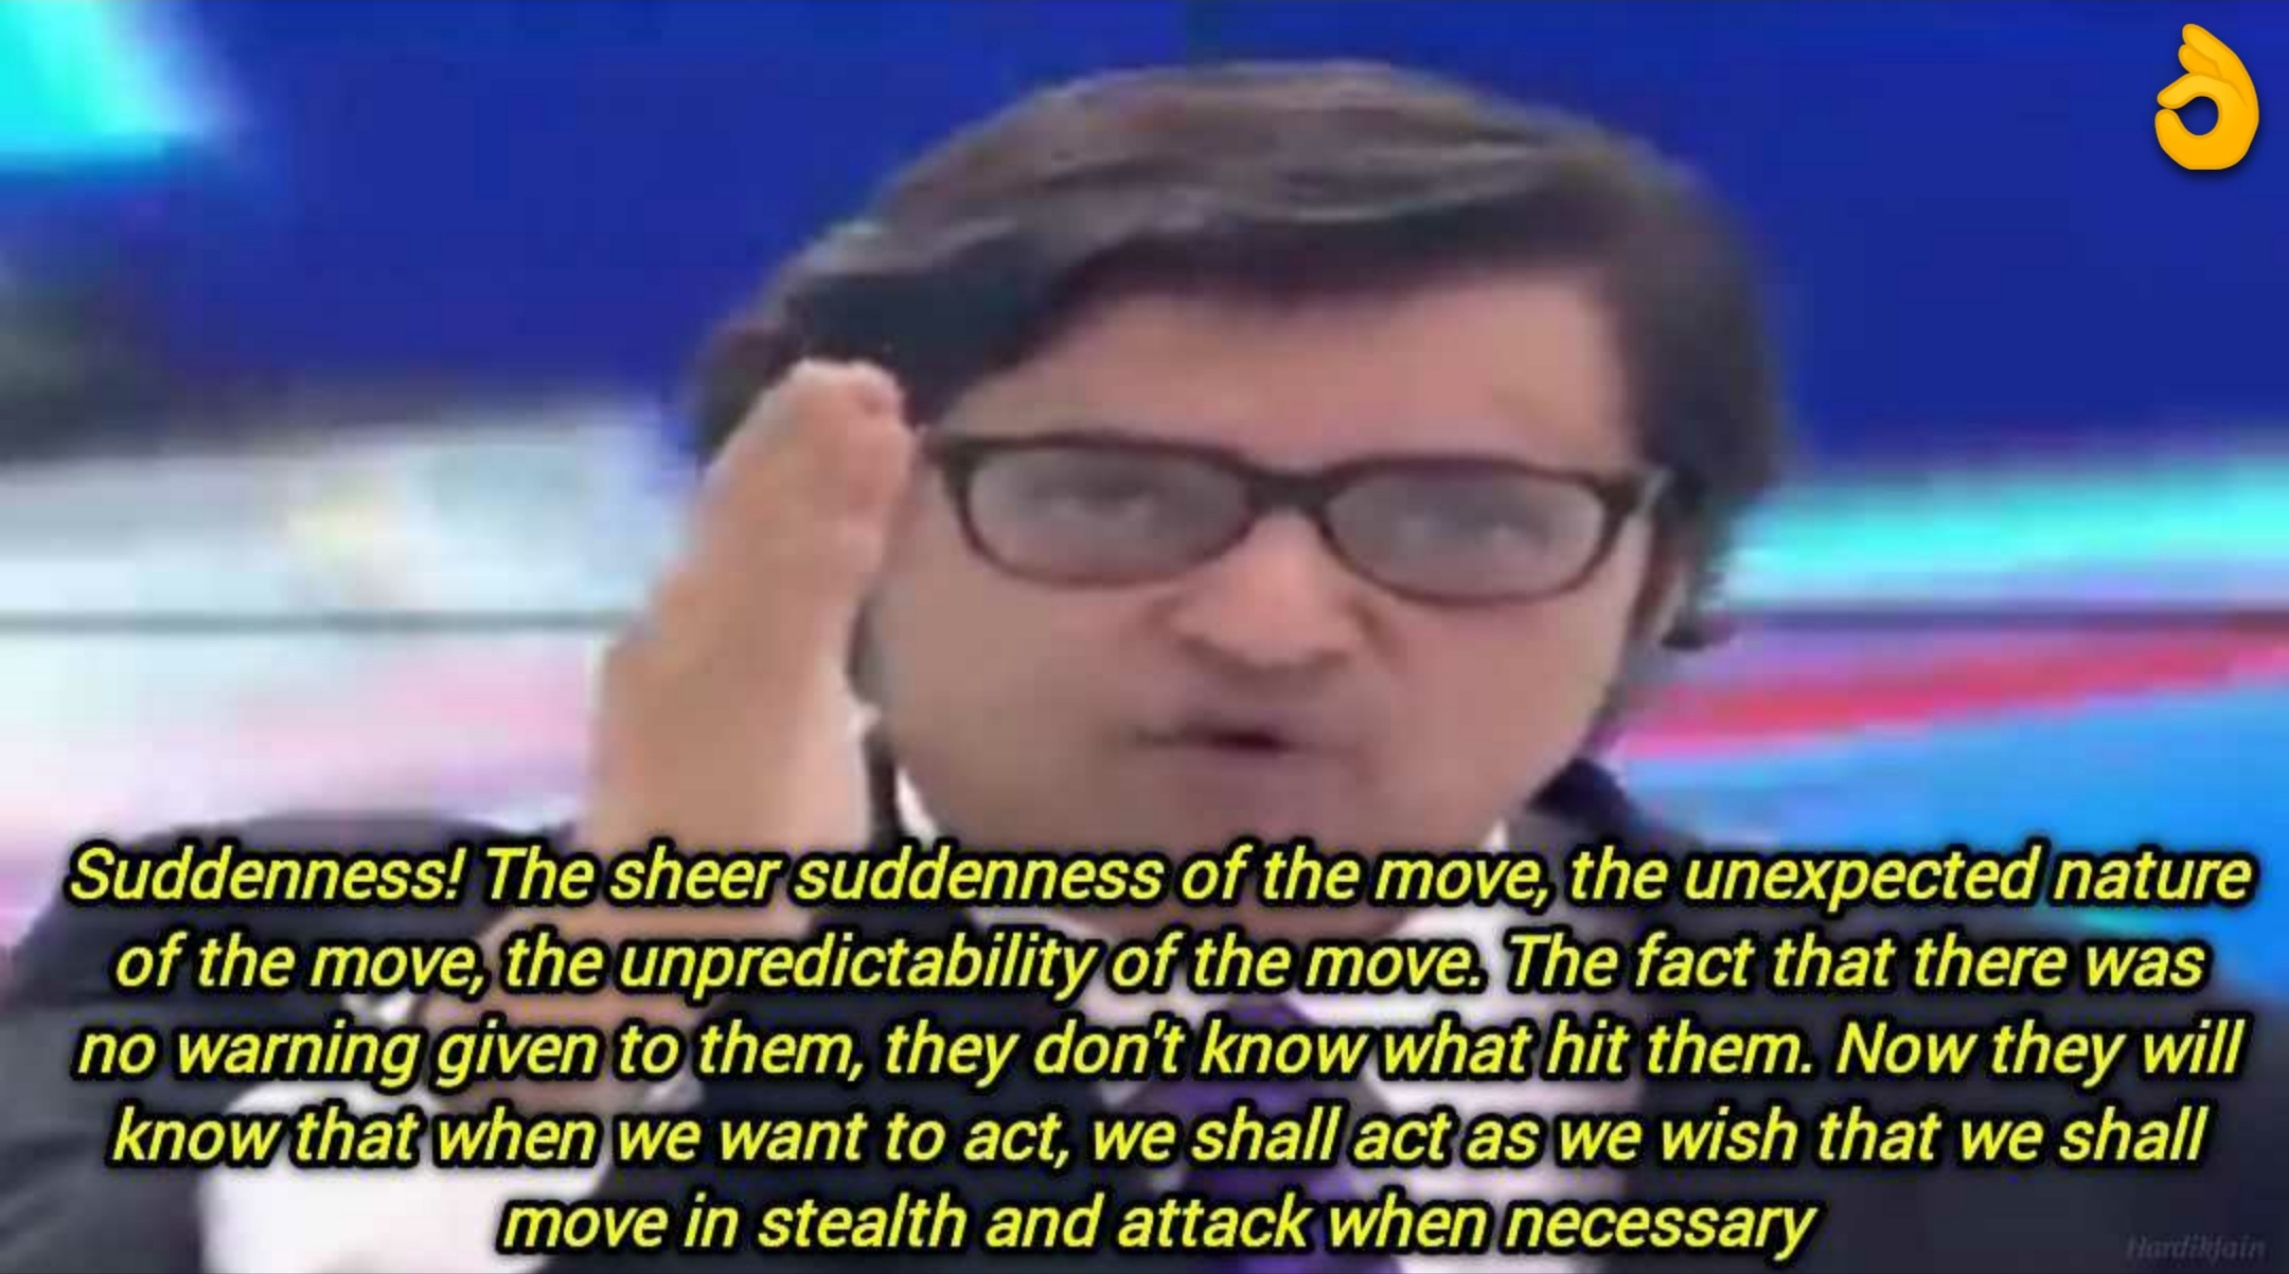 Arnab-Goswami-'Sheer-suddenness'-Indian-journalists-meme-templates - Pop  Culture, Entertainment, Humor, Travel & More